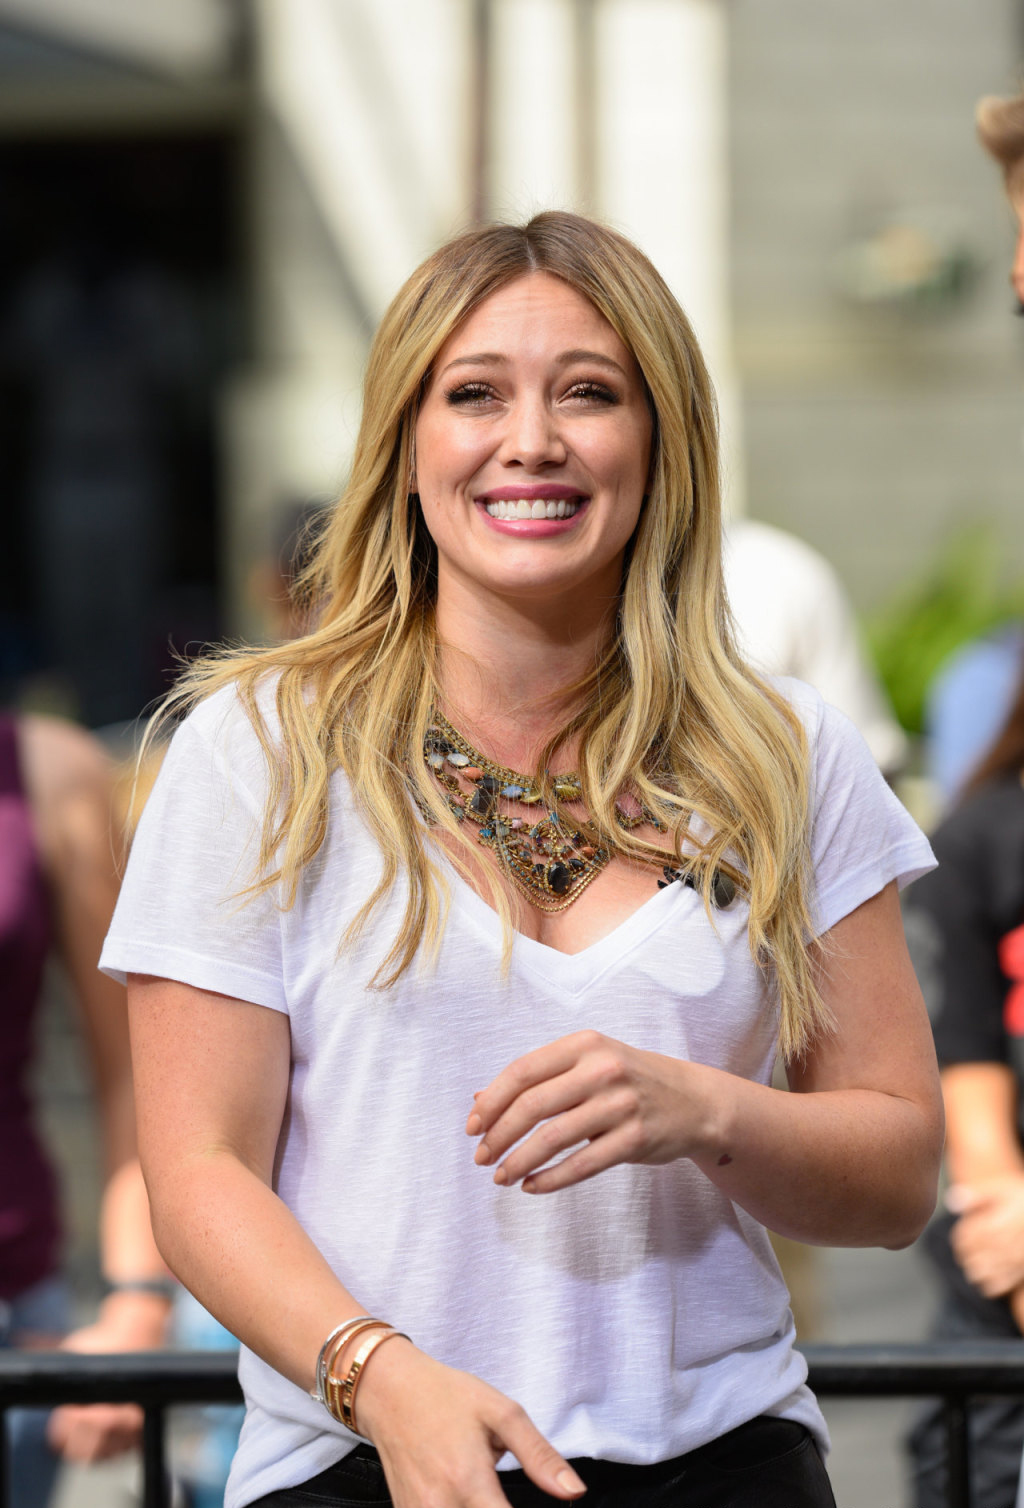 Hilary & Haylie Duff visit Extra at Universal Studios